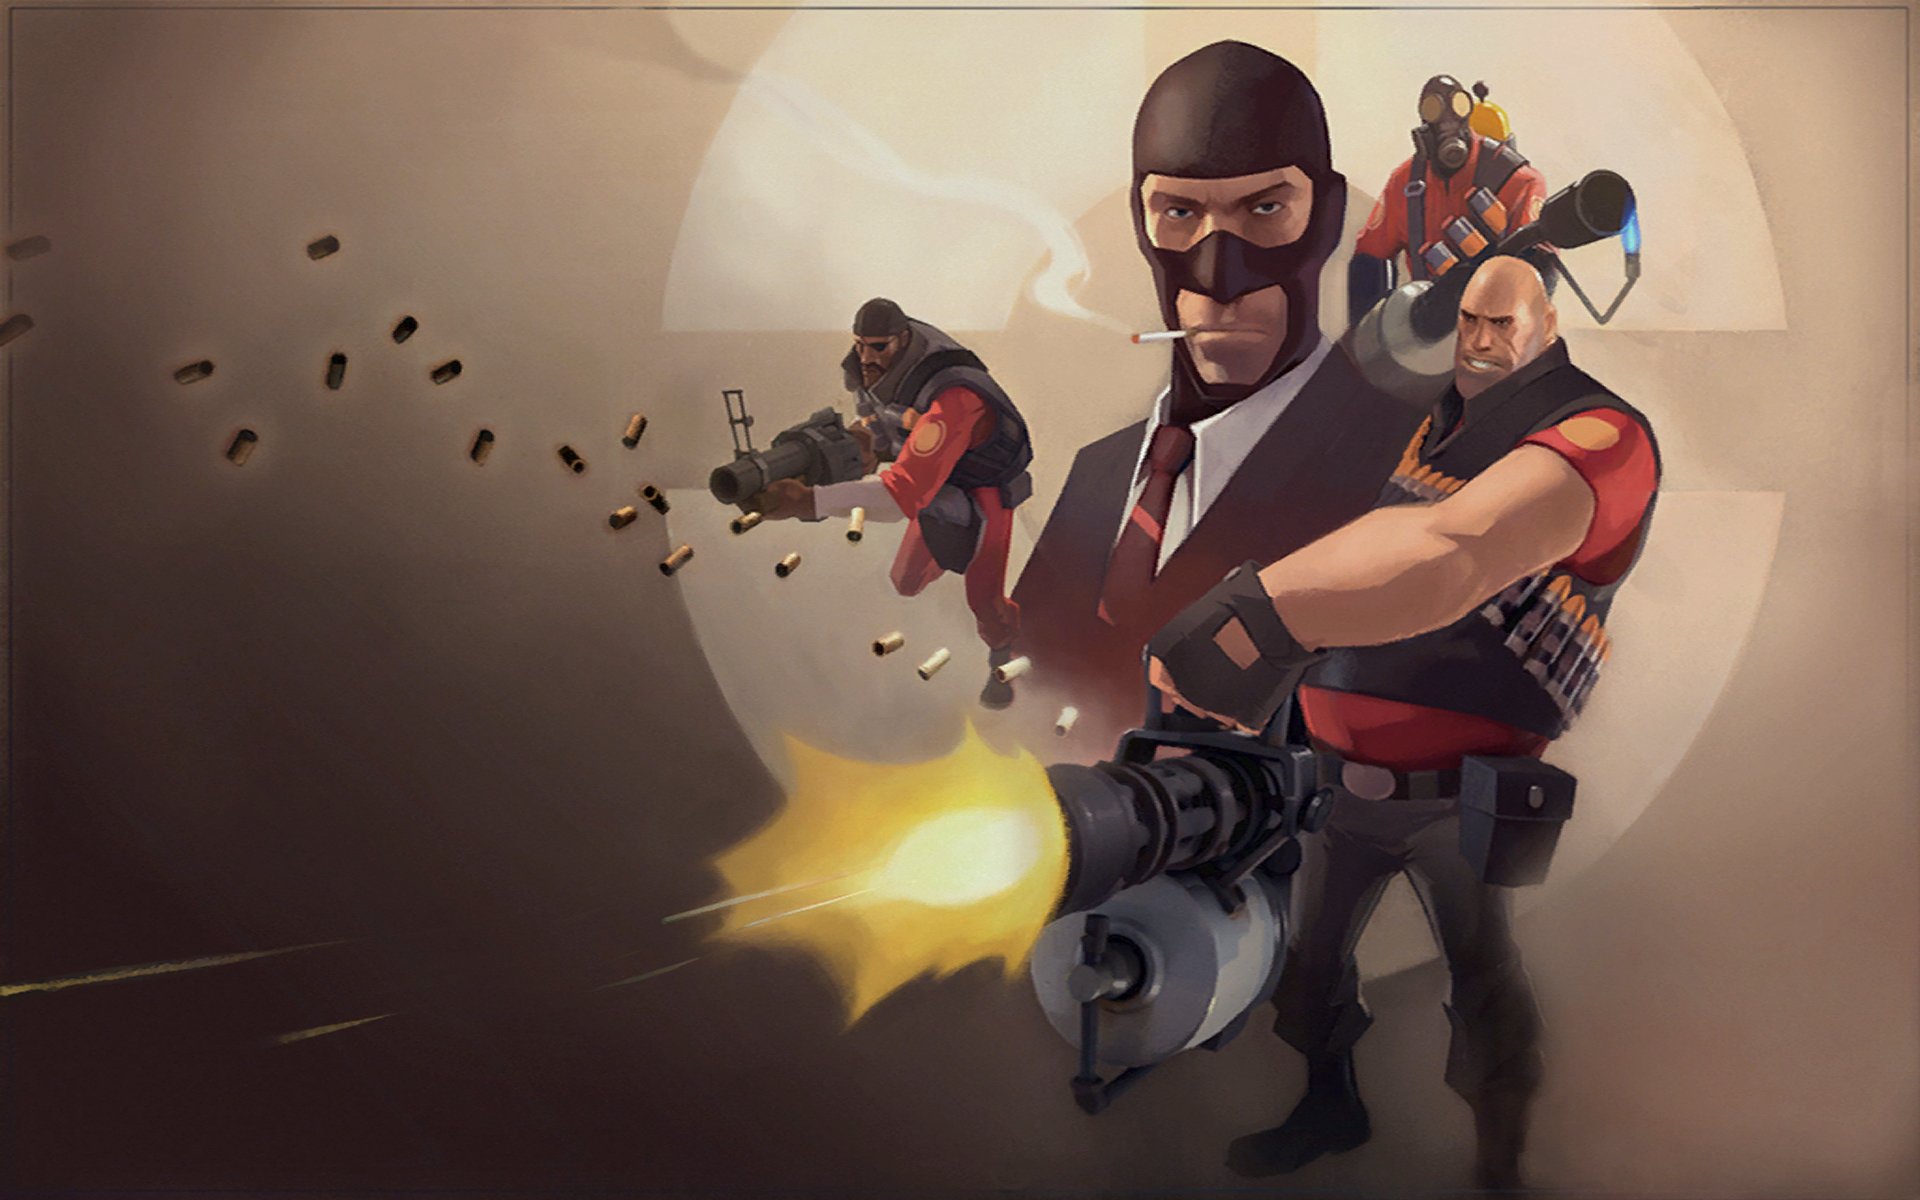 team fortress two classic download free